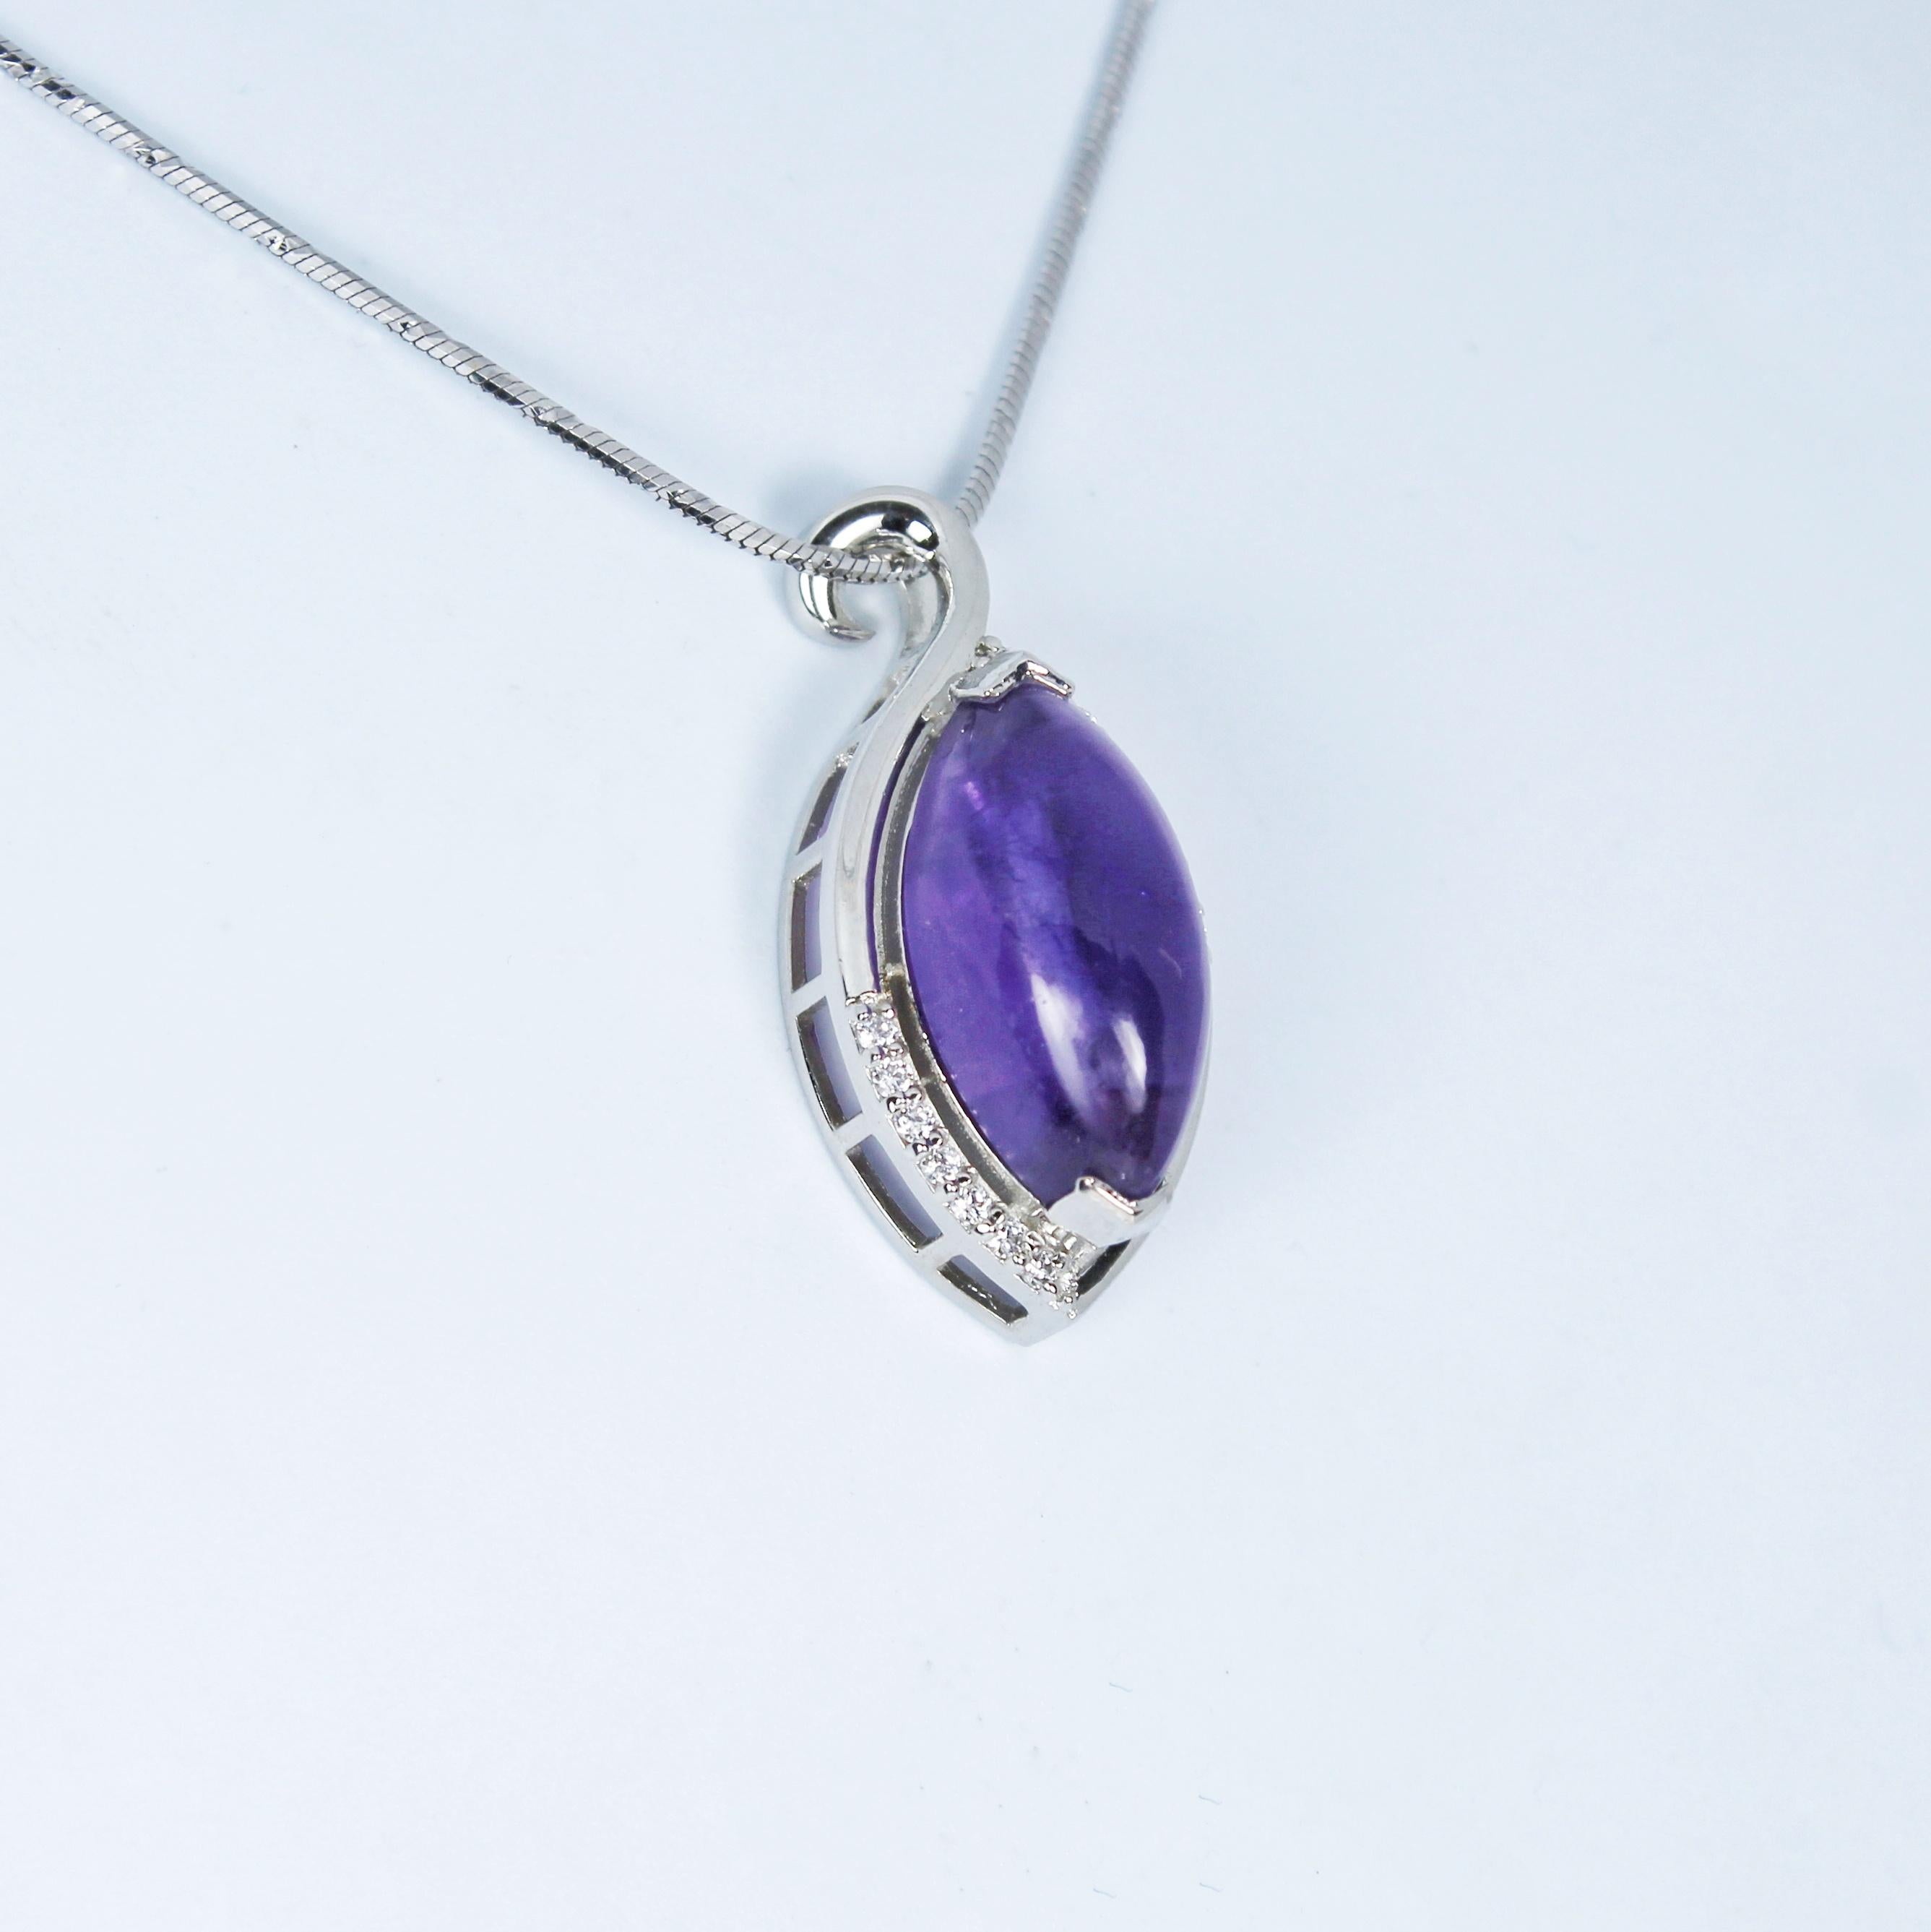 Product Details:

Metal of pendant and chain - Silver
Chain size - 16 inches
Pendant size - 26 x 12 x 11 mm
Pendant gross Weight - 3.940 Grams
Gemstone - Amethyst
Stone weight - 7 Carat
Stone shape - Marquise
Stone size - 18 x 9 mm


Unique designer